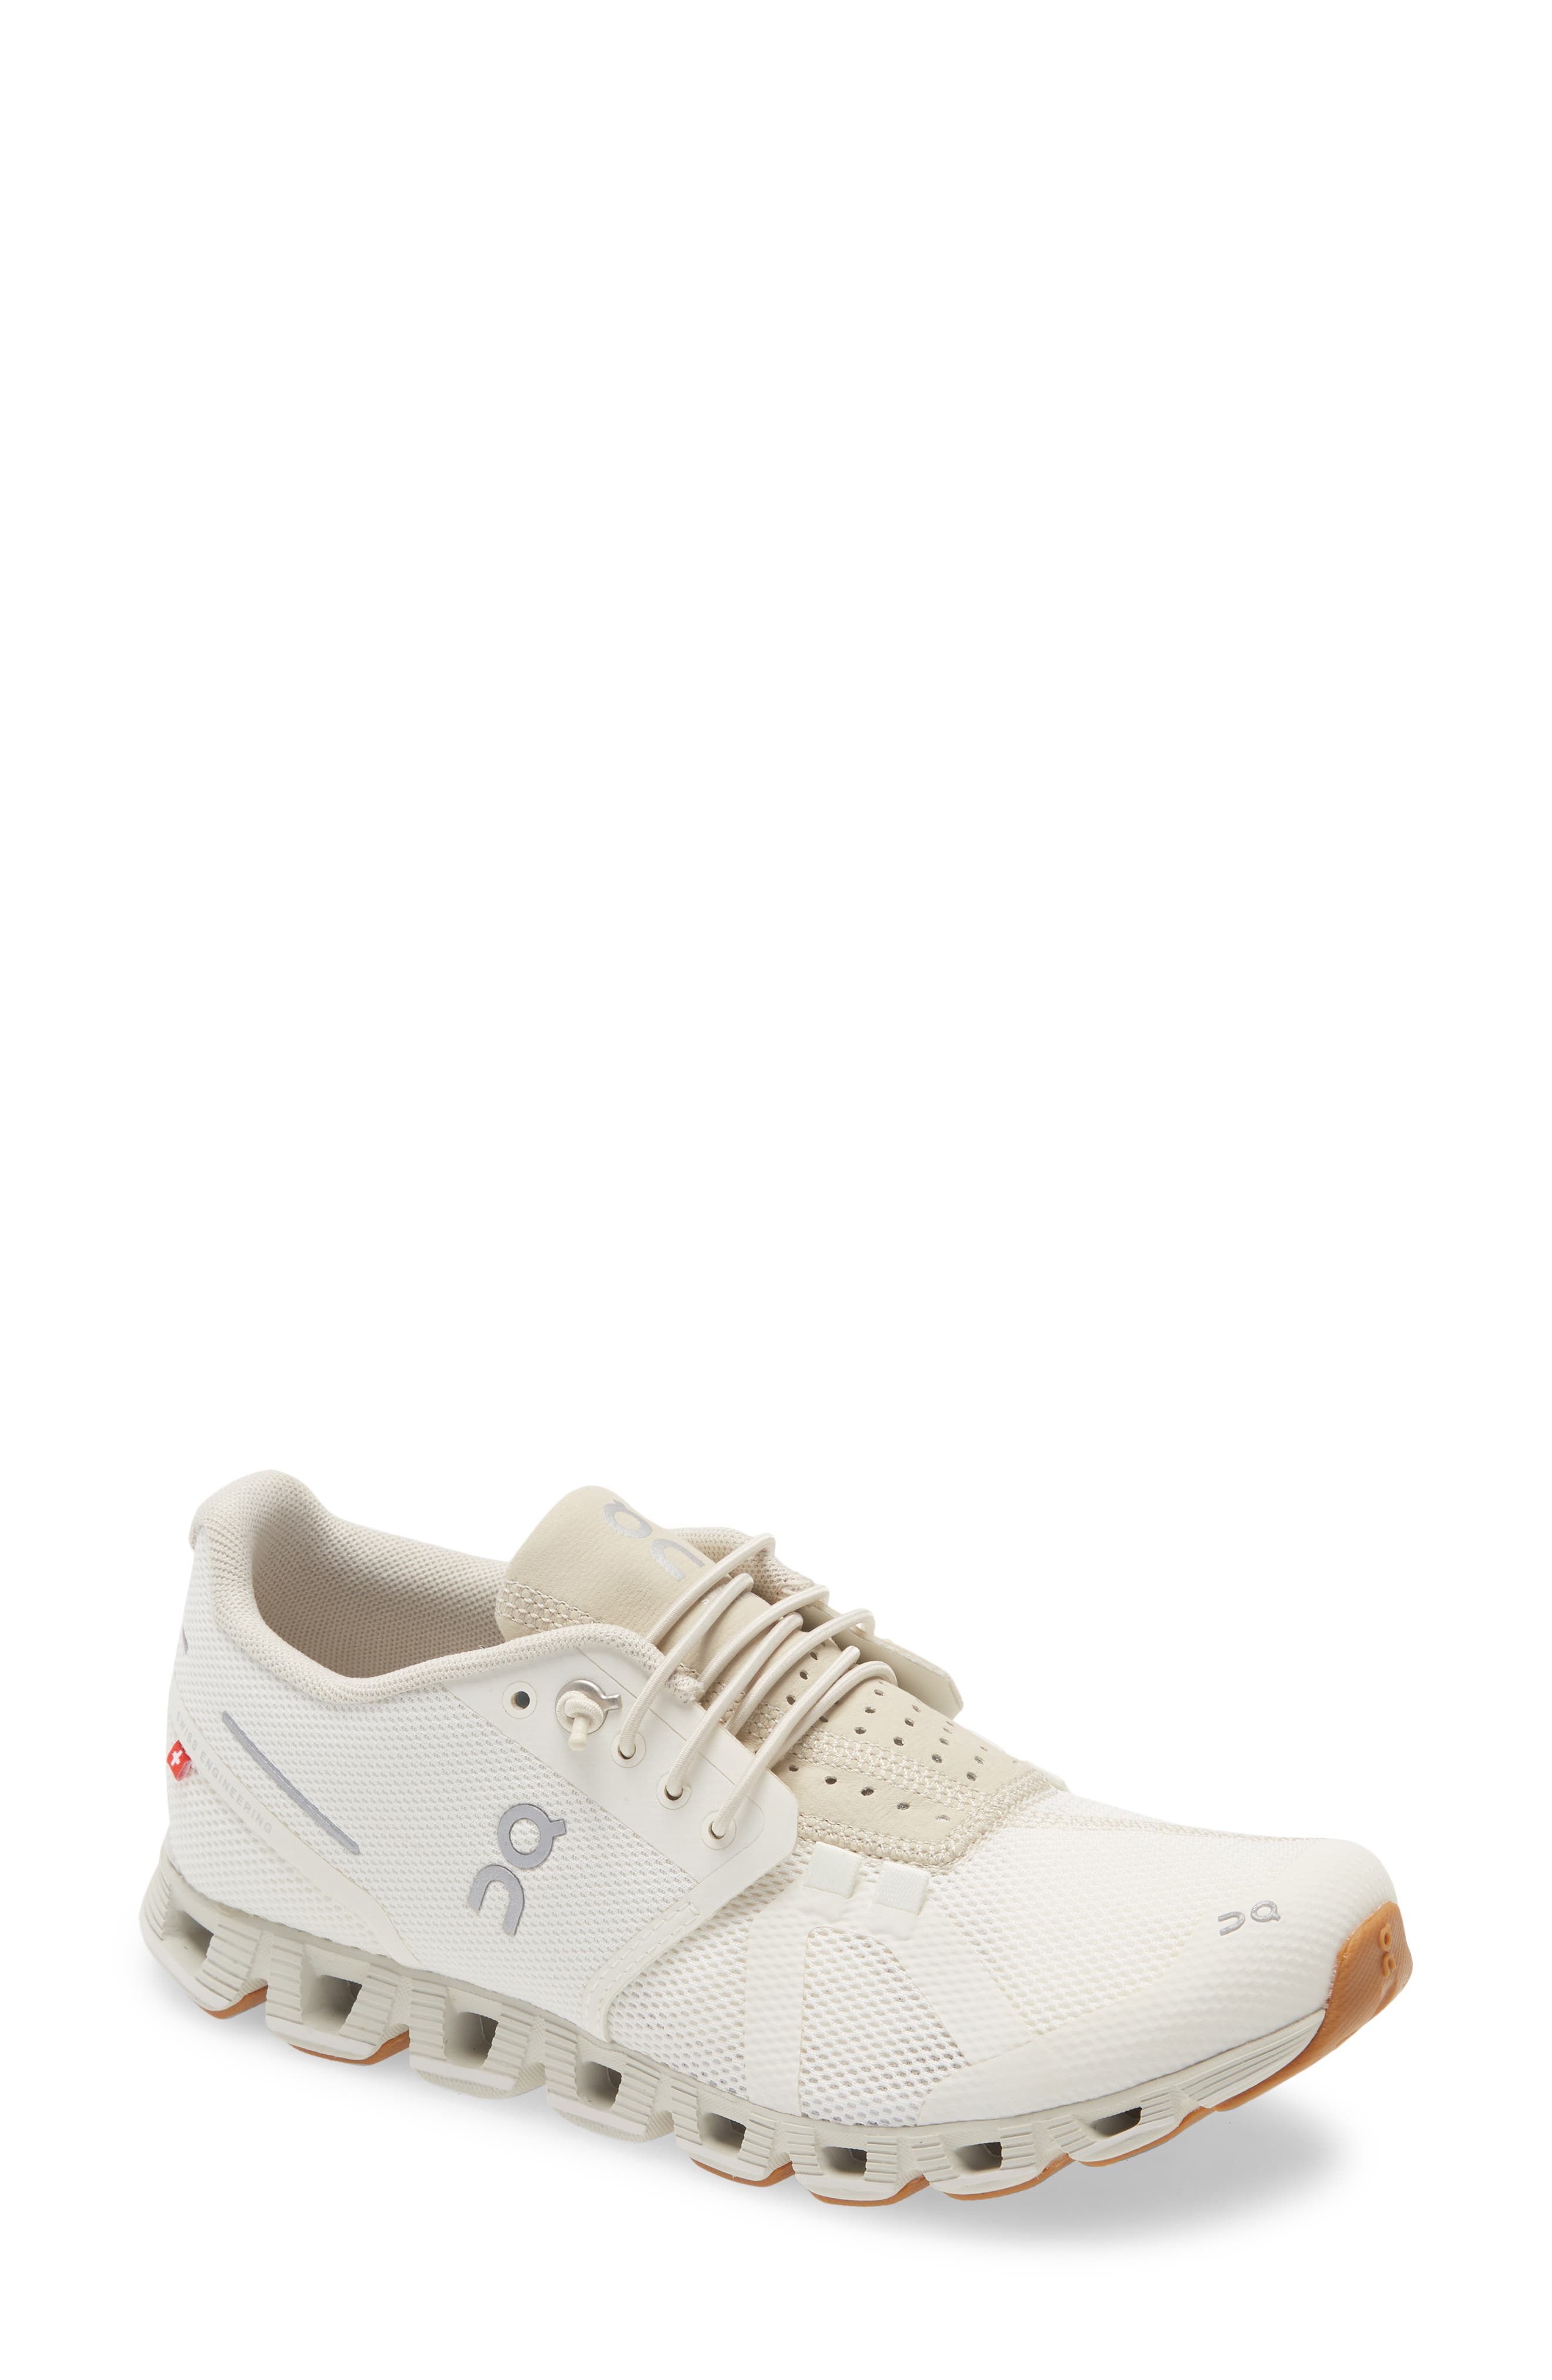 on cloud tennis shoes womens